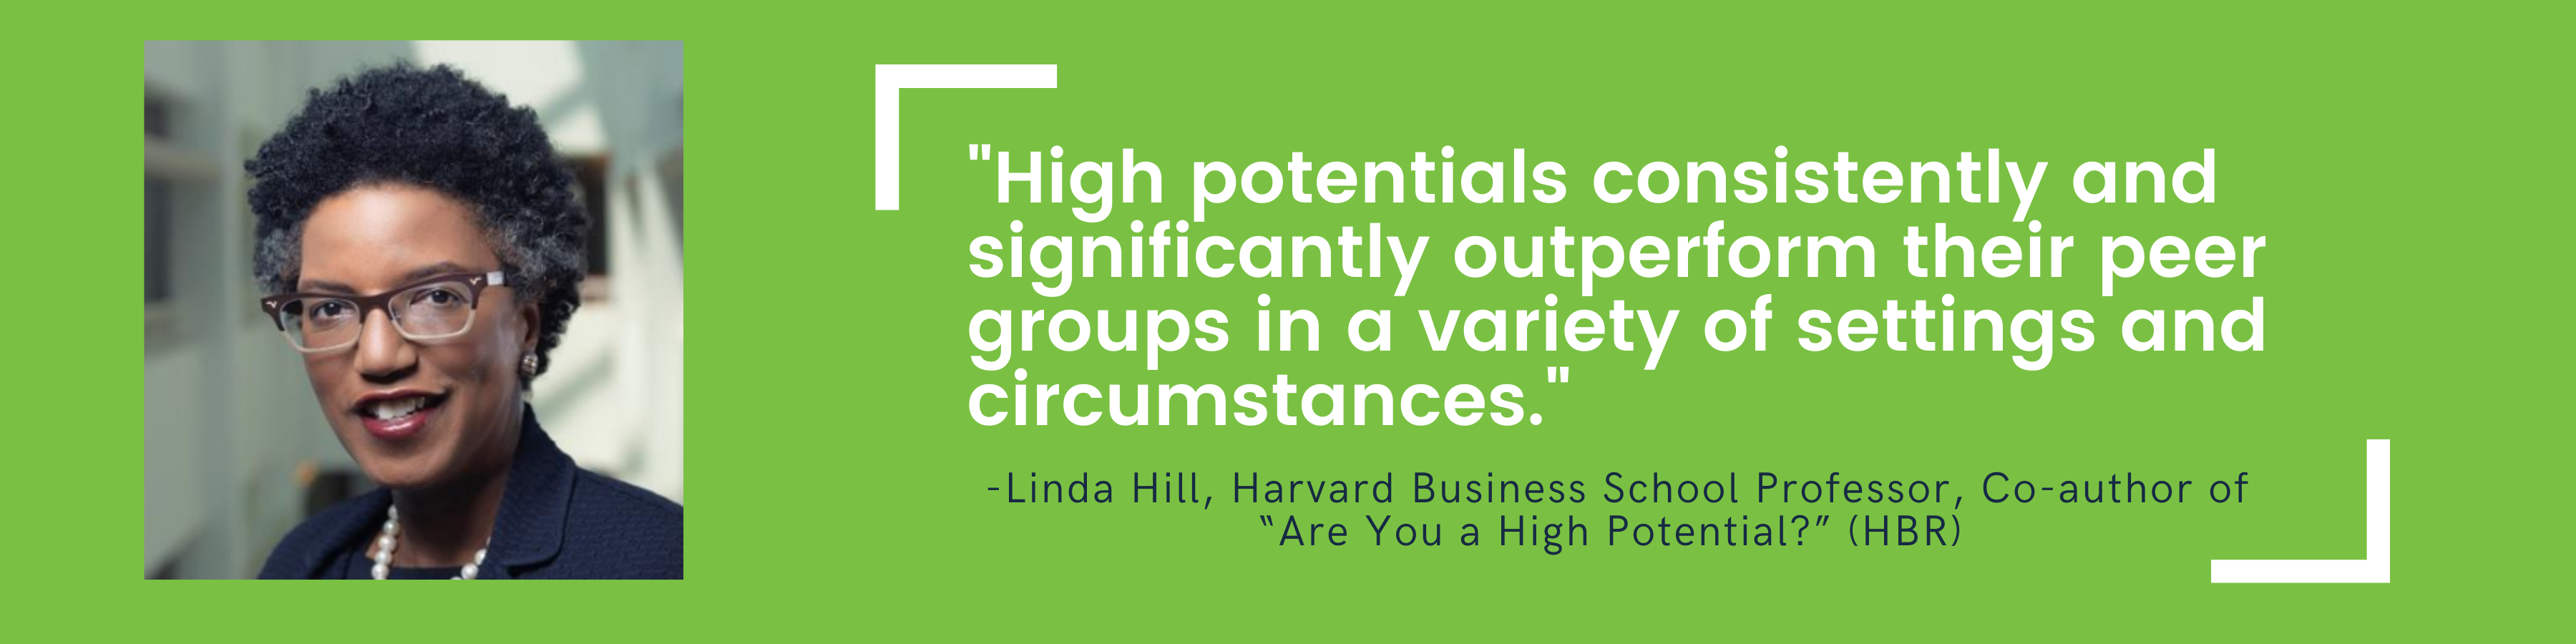 Linda Hill | World-renowned Expert on Leadership and Diversity-Driven Innovation; Award-winning Co-author of Bestseller “Collective Genius;” Co-founder, Paradox Strategies Leadership Advisory Firm; Chair of the Leadership Initiative and Professor of Business Administration, Harvard Business School